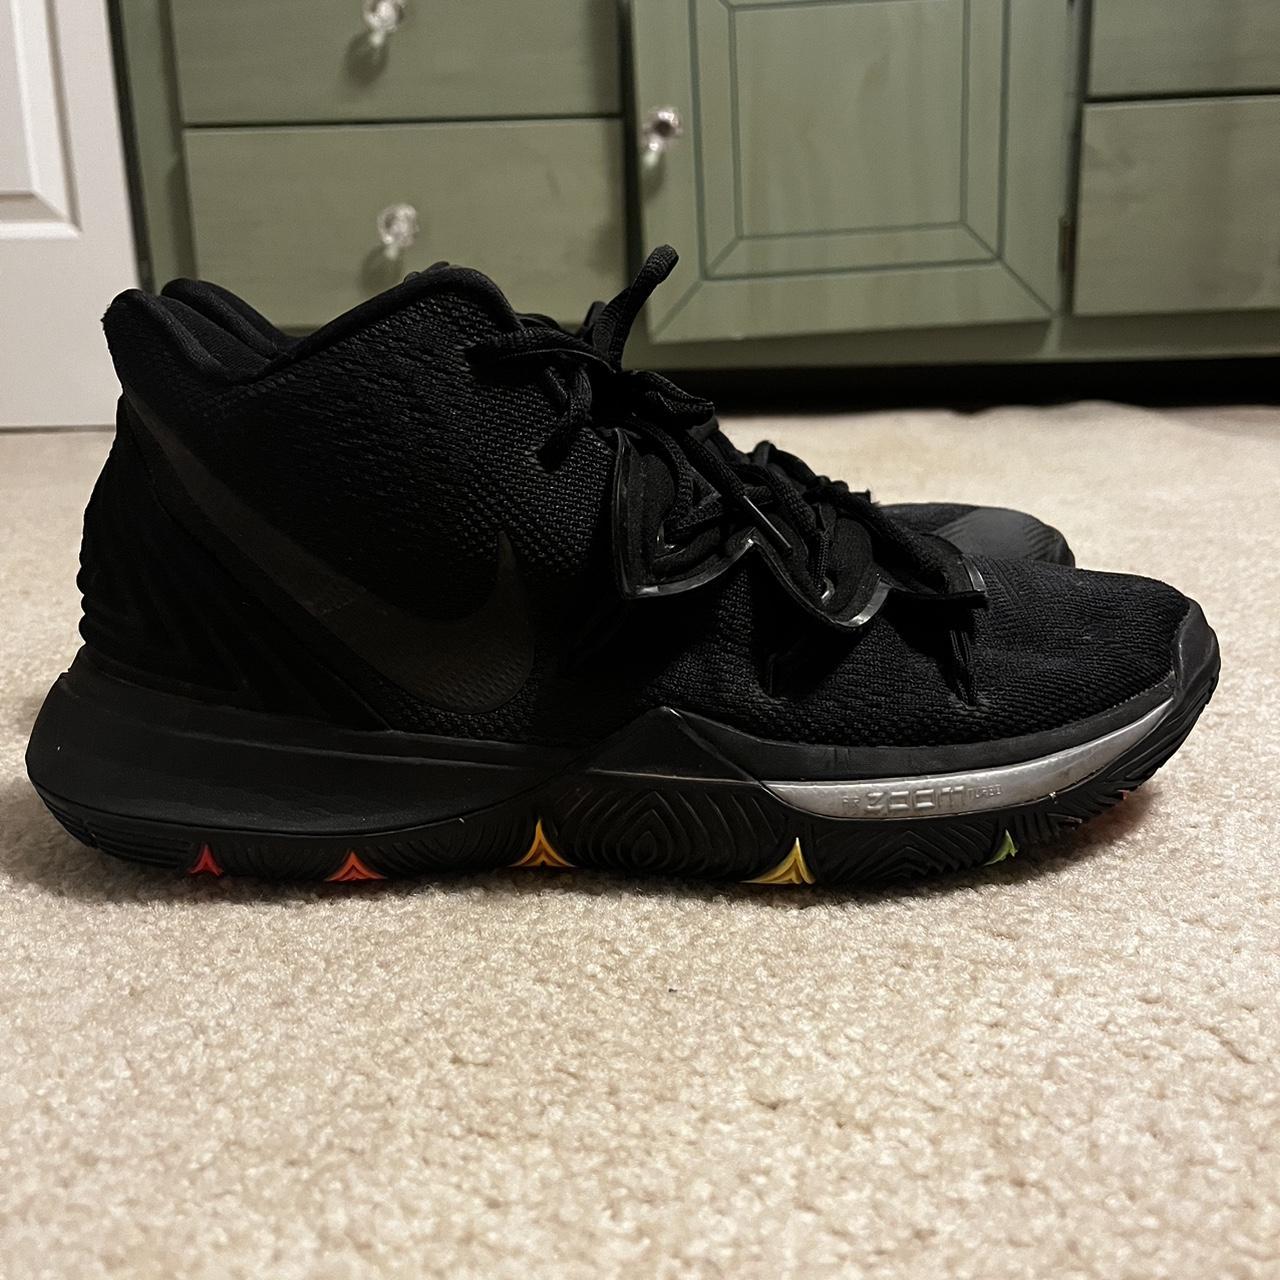 Kyrie 5 Black Rainbow Soles 8/10 condition One of... - Depop